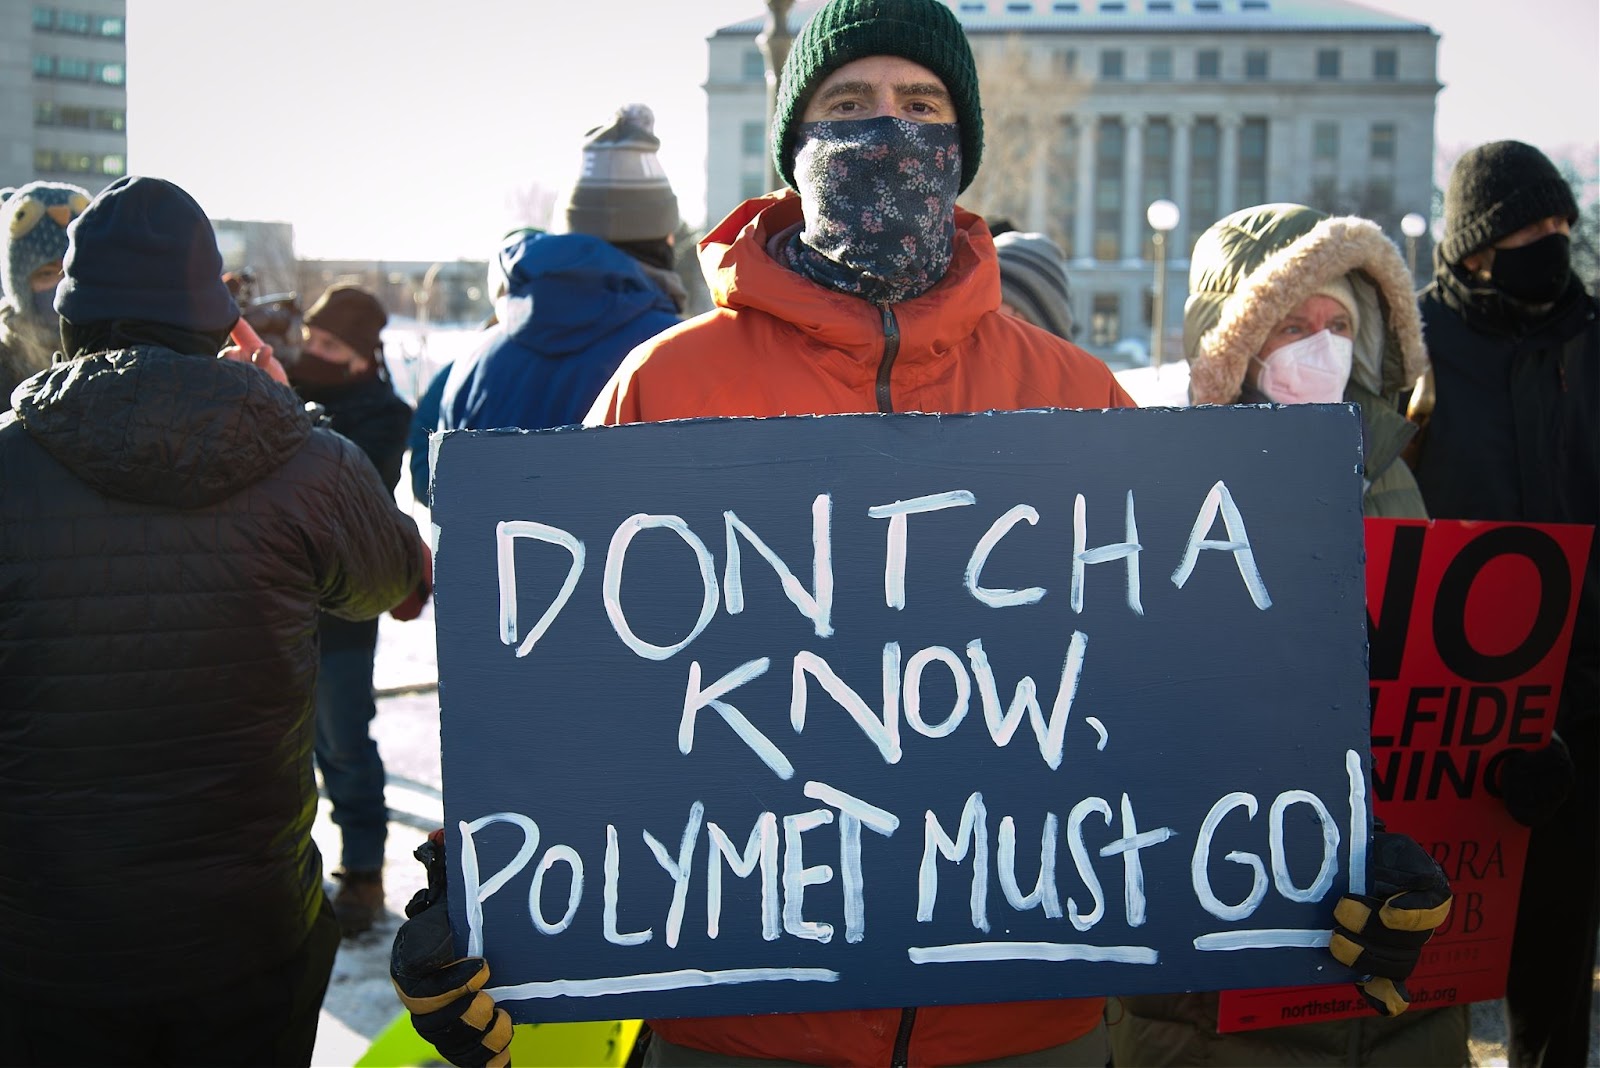 jay eidsness stands holding a sign that says doncha know polymet must go